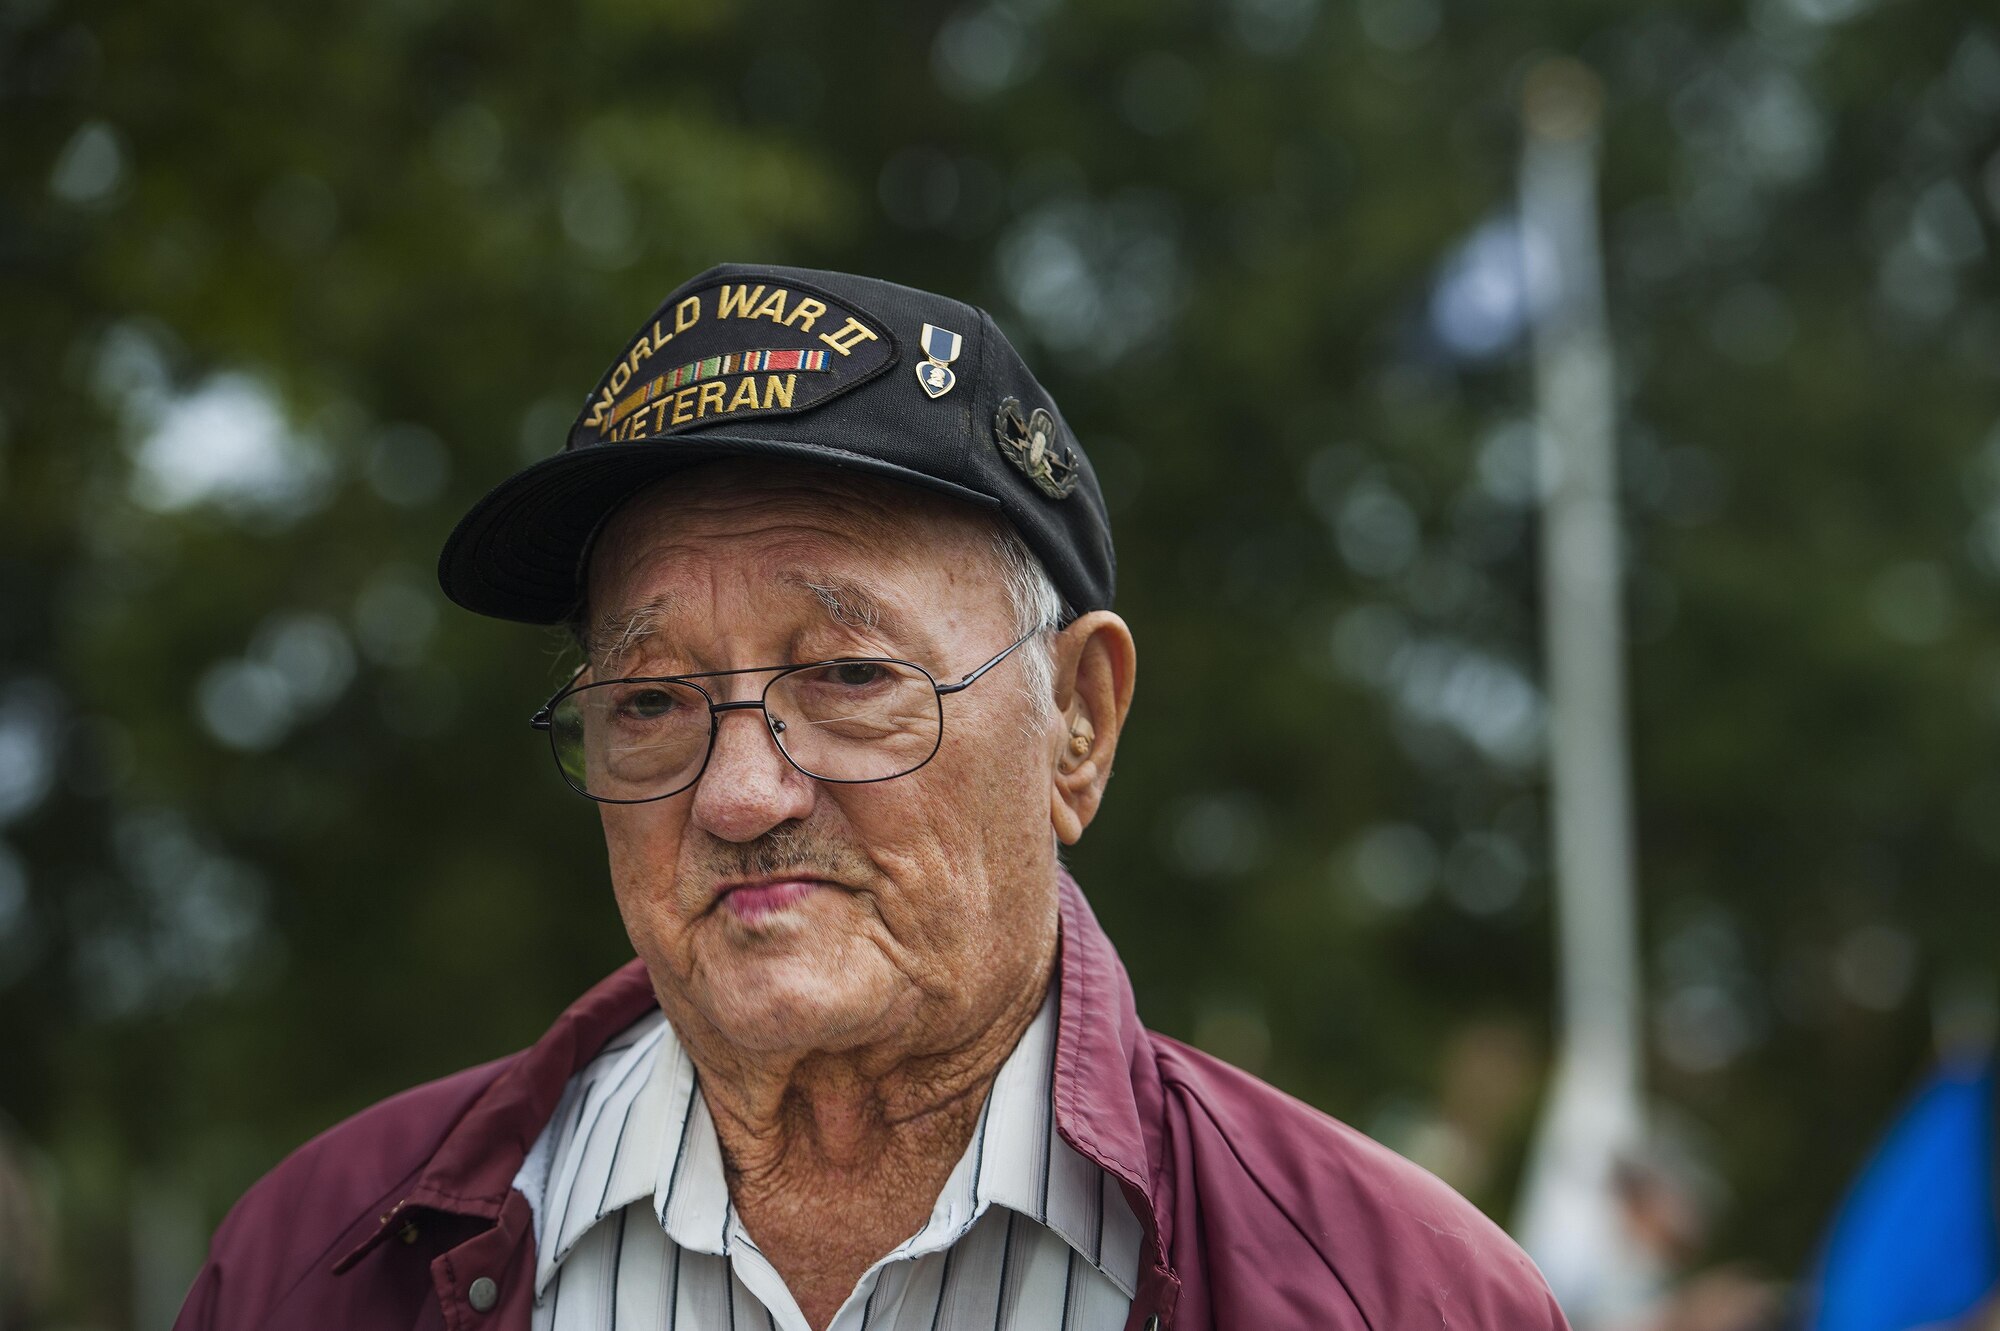 Allen Orndorff, a U.S. Army World War II veteran from the 101st Airborne Division, takes a moment of silence before meeting service members and civilians from Team Langley after a Prisoner of War/Missing in Action closing ceremony at Joint Base Langley-Eustis, Va., Sept. 16, 2016. 72 years ago, Orndorff fought the Nazis during “D-day” on the 50-mile coastlines of Normandy, France, with 160,000 Allied comrades who on June 6, 1944. Orndoff and members of Team Langley attended the ceremony to pay tribute to more than 83,400 POWs who are still missing today, and honor those who survived and returned wars fought in the past and present. More than 150,000 Americans have been held as prisoners of war throughout history and today. (U.S. Air Force photo by Staff Sgt. Nick Wilson/Released)